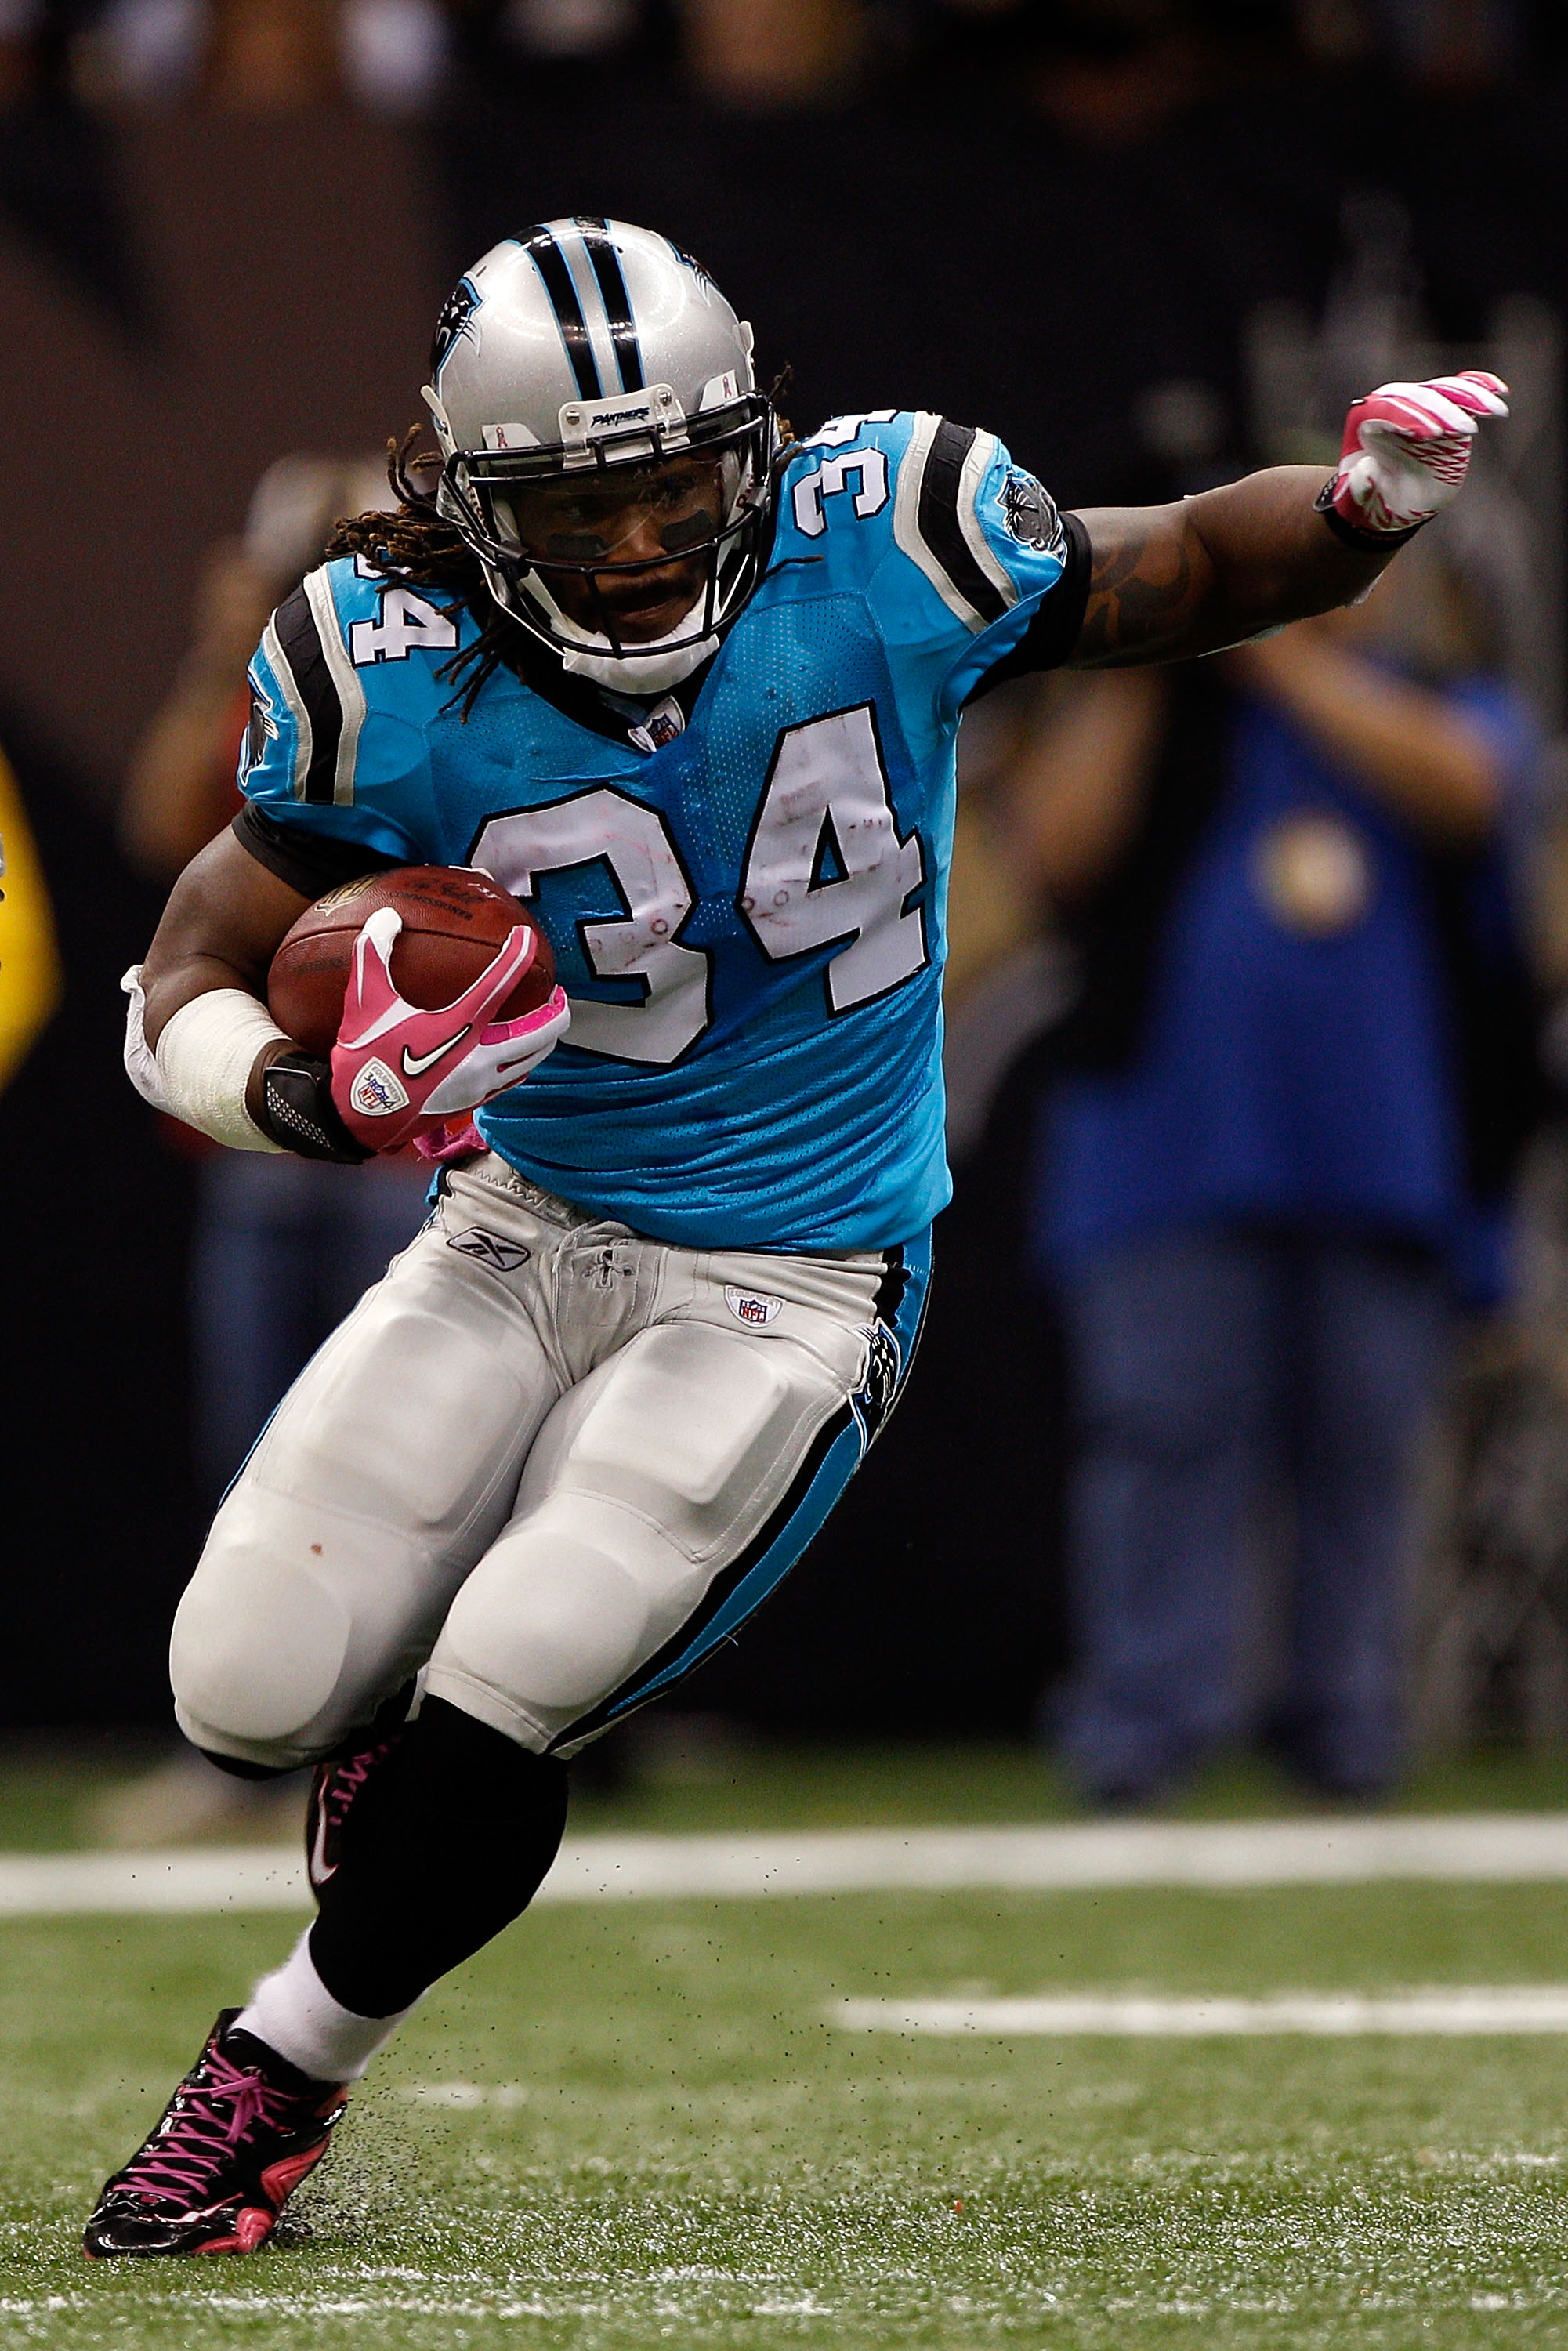 NEW ORLEANS - OCTOBER 03:  DeAngelo Williams #34 of the Carolina Panthers in action during the game against the New Orleans Saints at the Louisiana Superdome on October 3, 2010 in New Orleans, Louisiana.  (Photo by Chris Graythen/Getty Images)